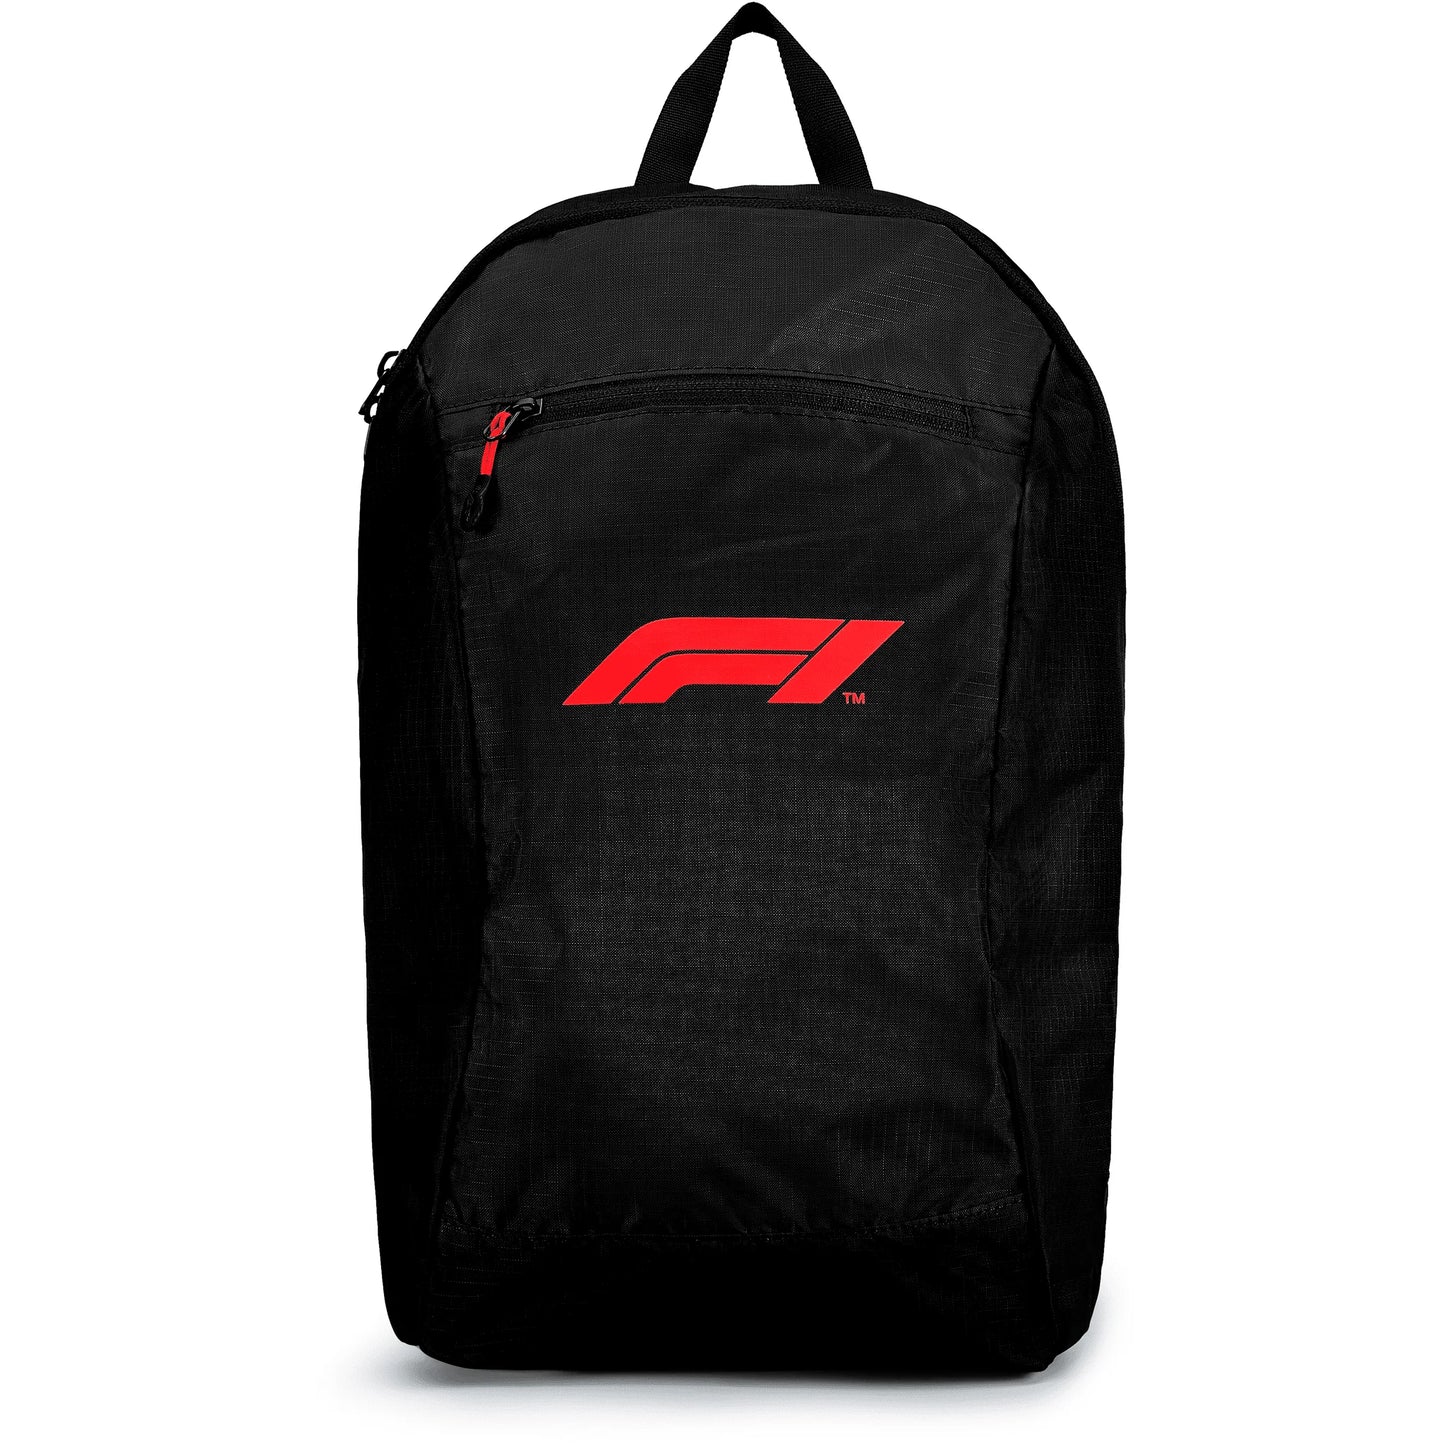 Formula 1 Tech Collection F1 Packable Backpack - Black